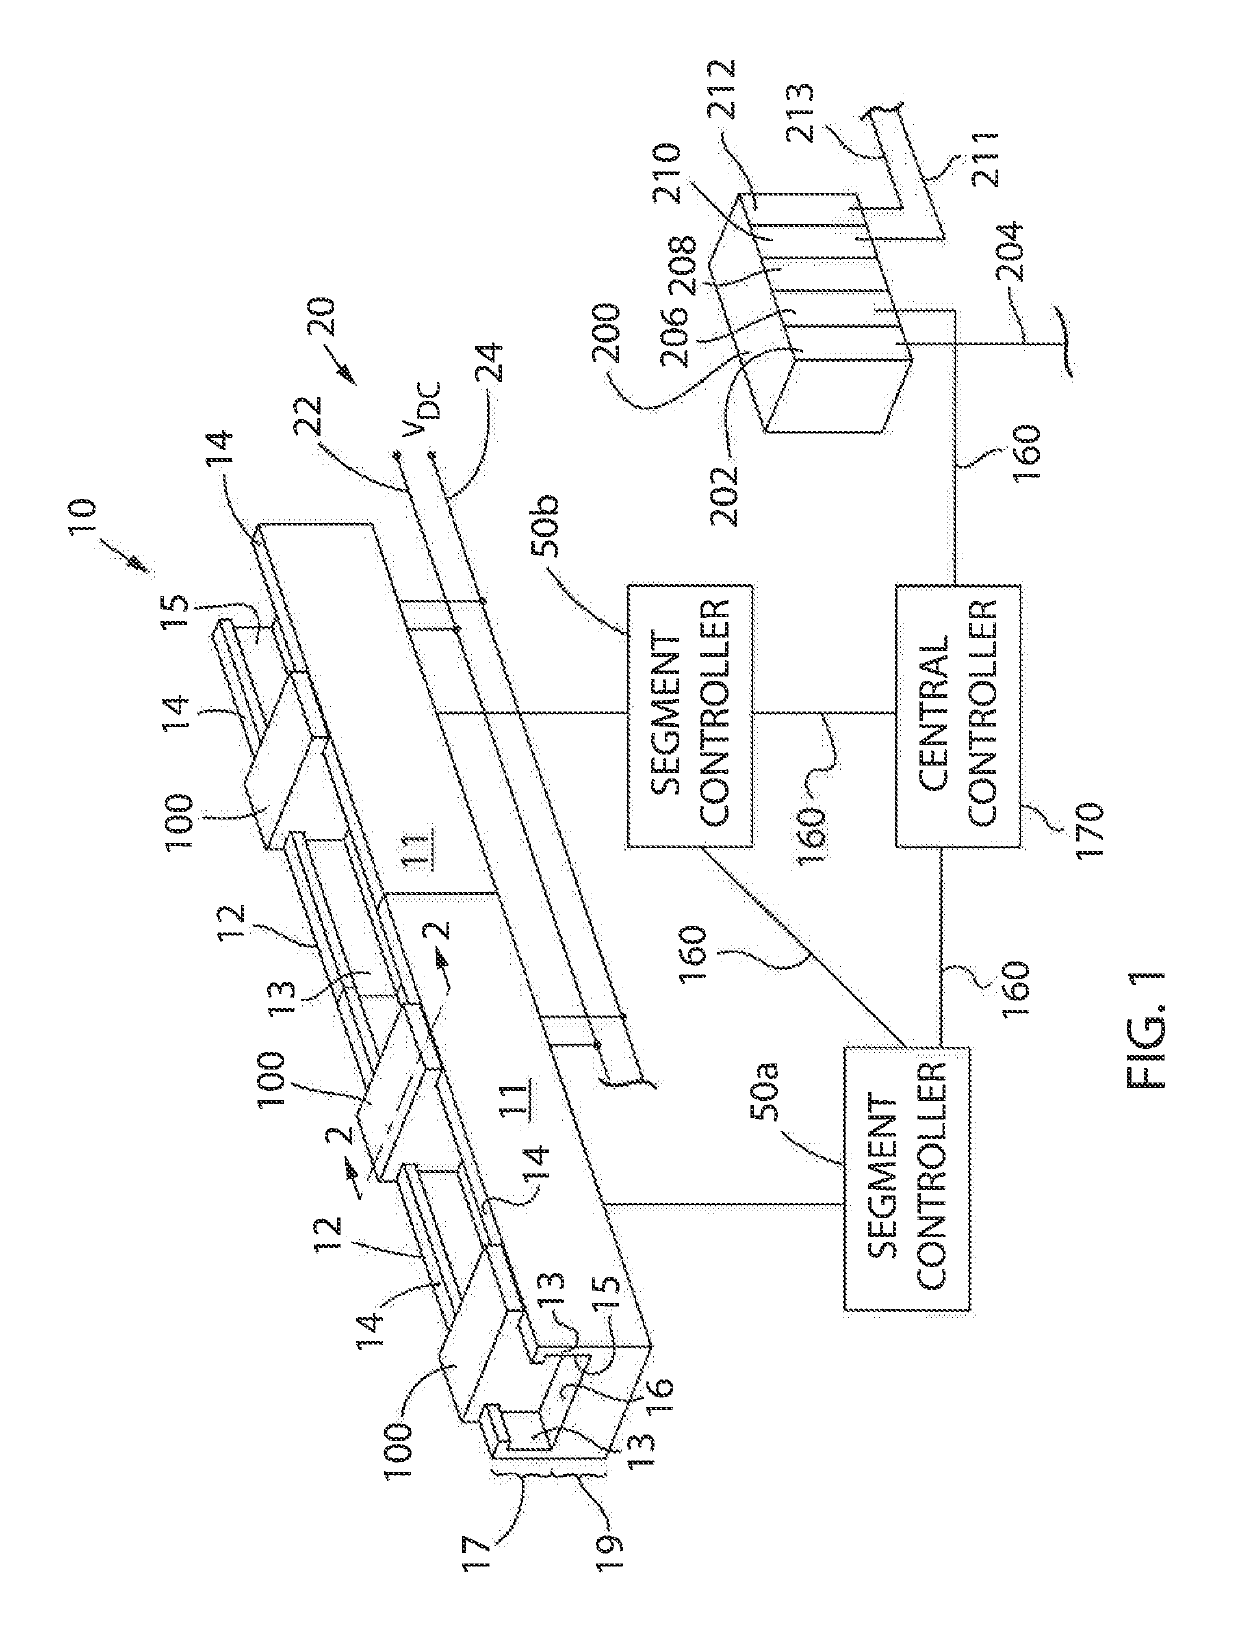 System and method for monitoring mover status in an independent cart system